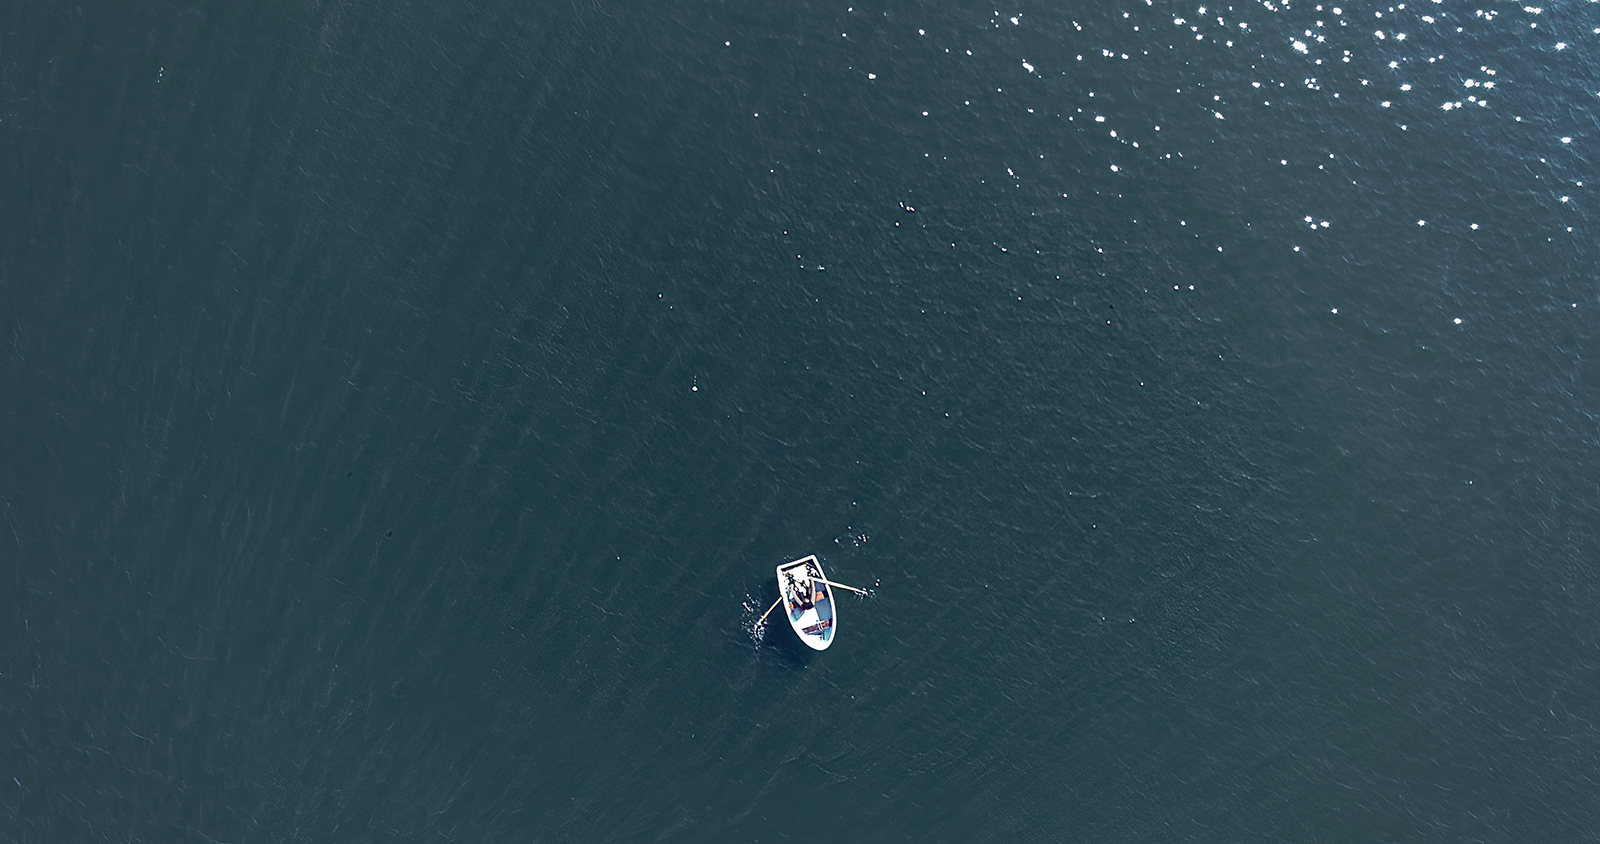 An aerial image of a rowboat in the water